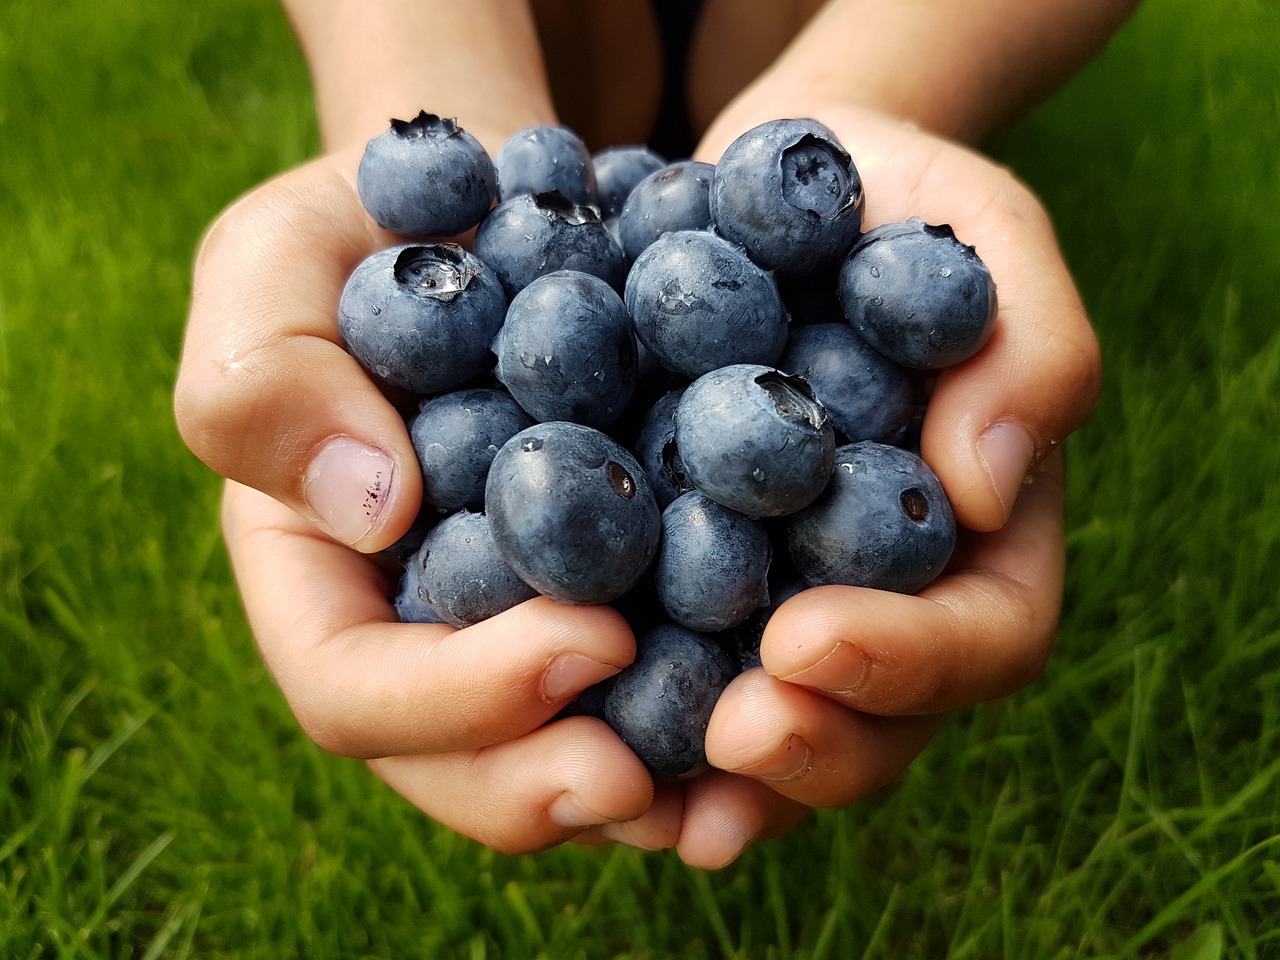 hands holding a pile of blueberries